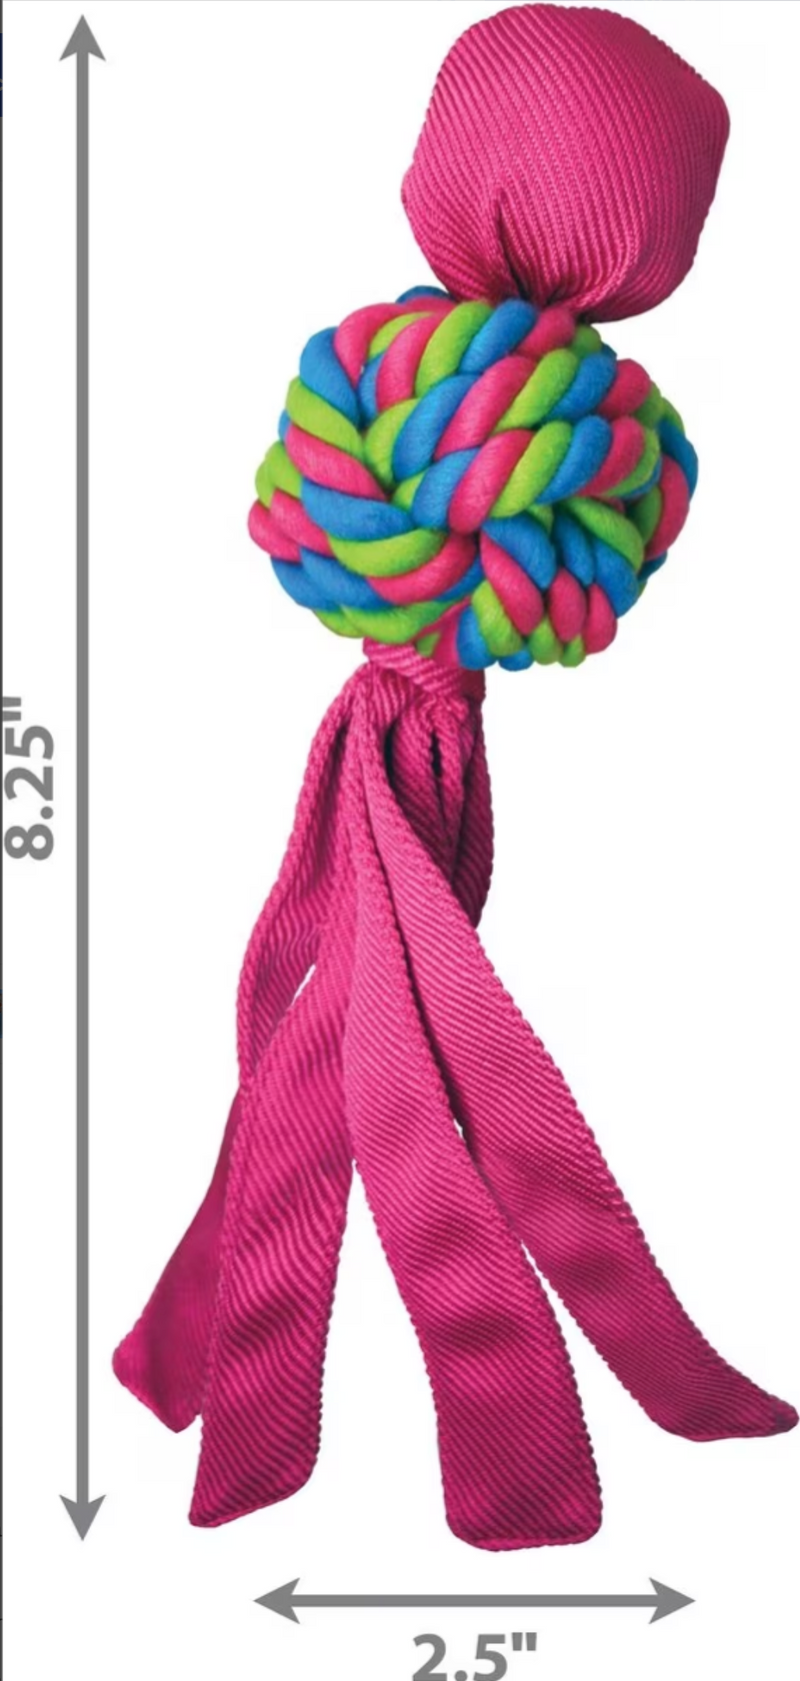 KONG Wubba Weave Dog Toy: Small • Choose Color • CHEAPER THAN CHEWY